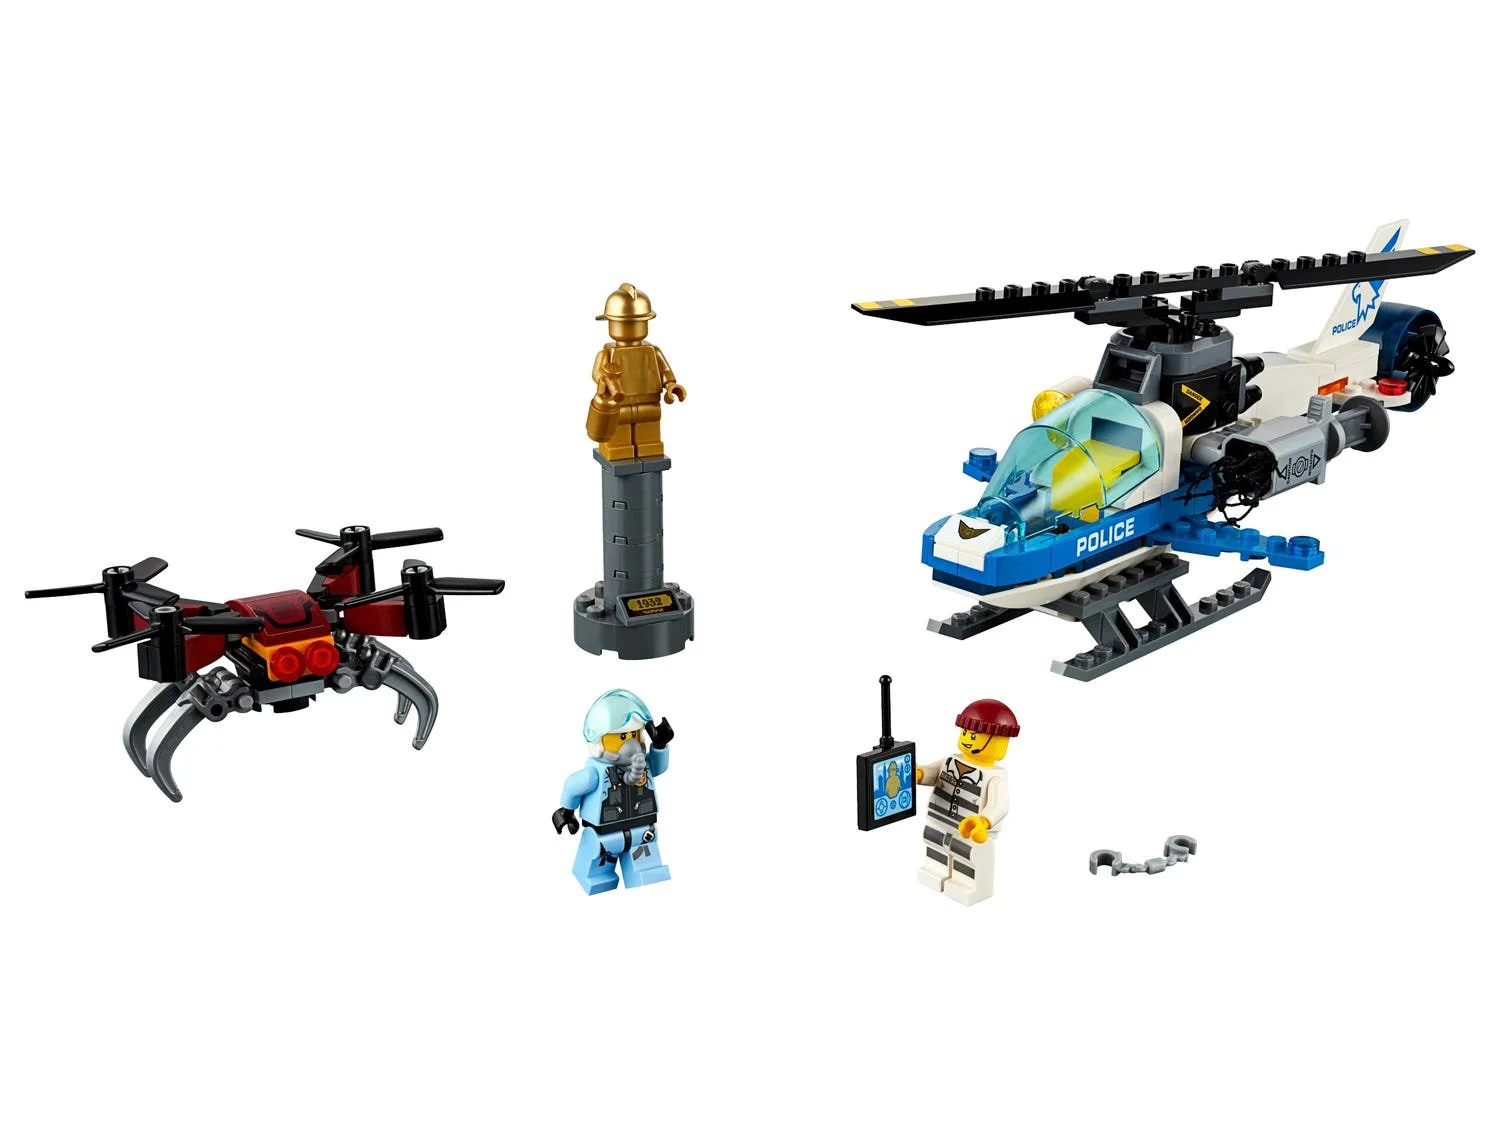 LEGO City - Sky Police Drone Chase